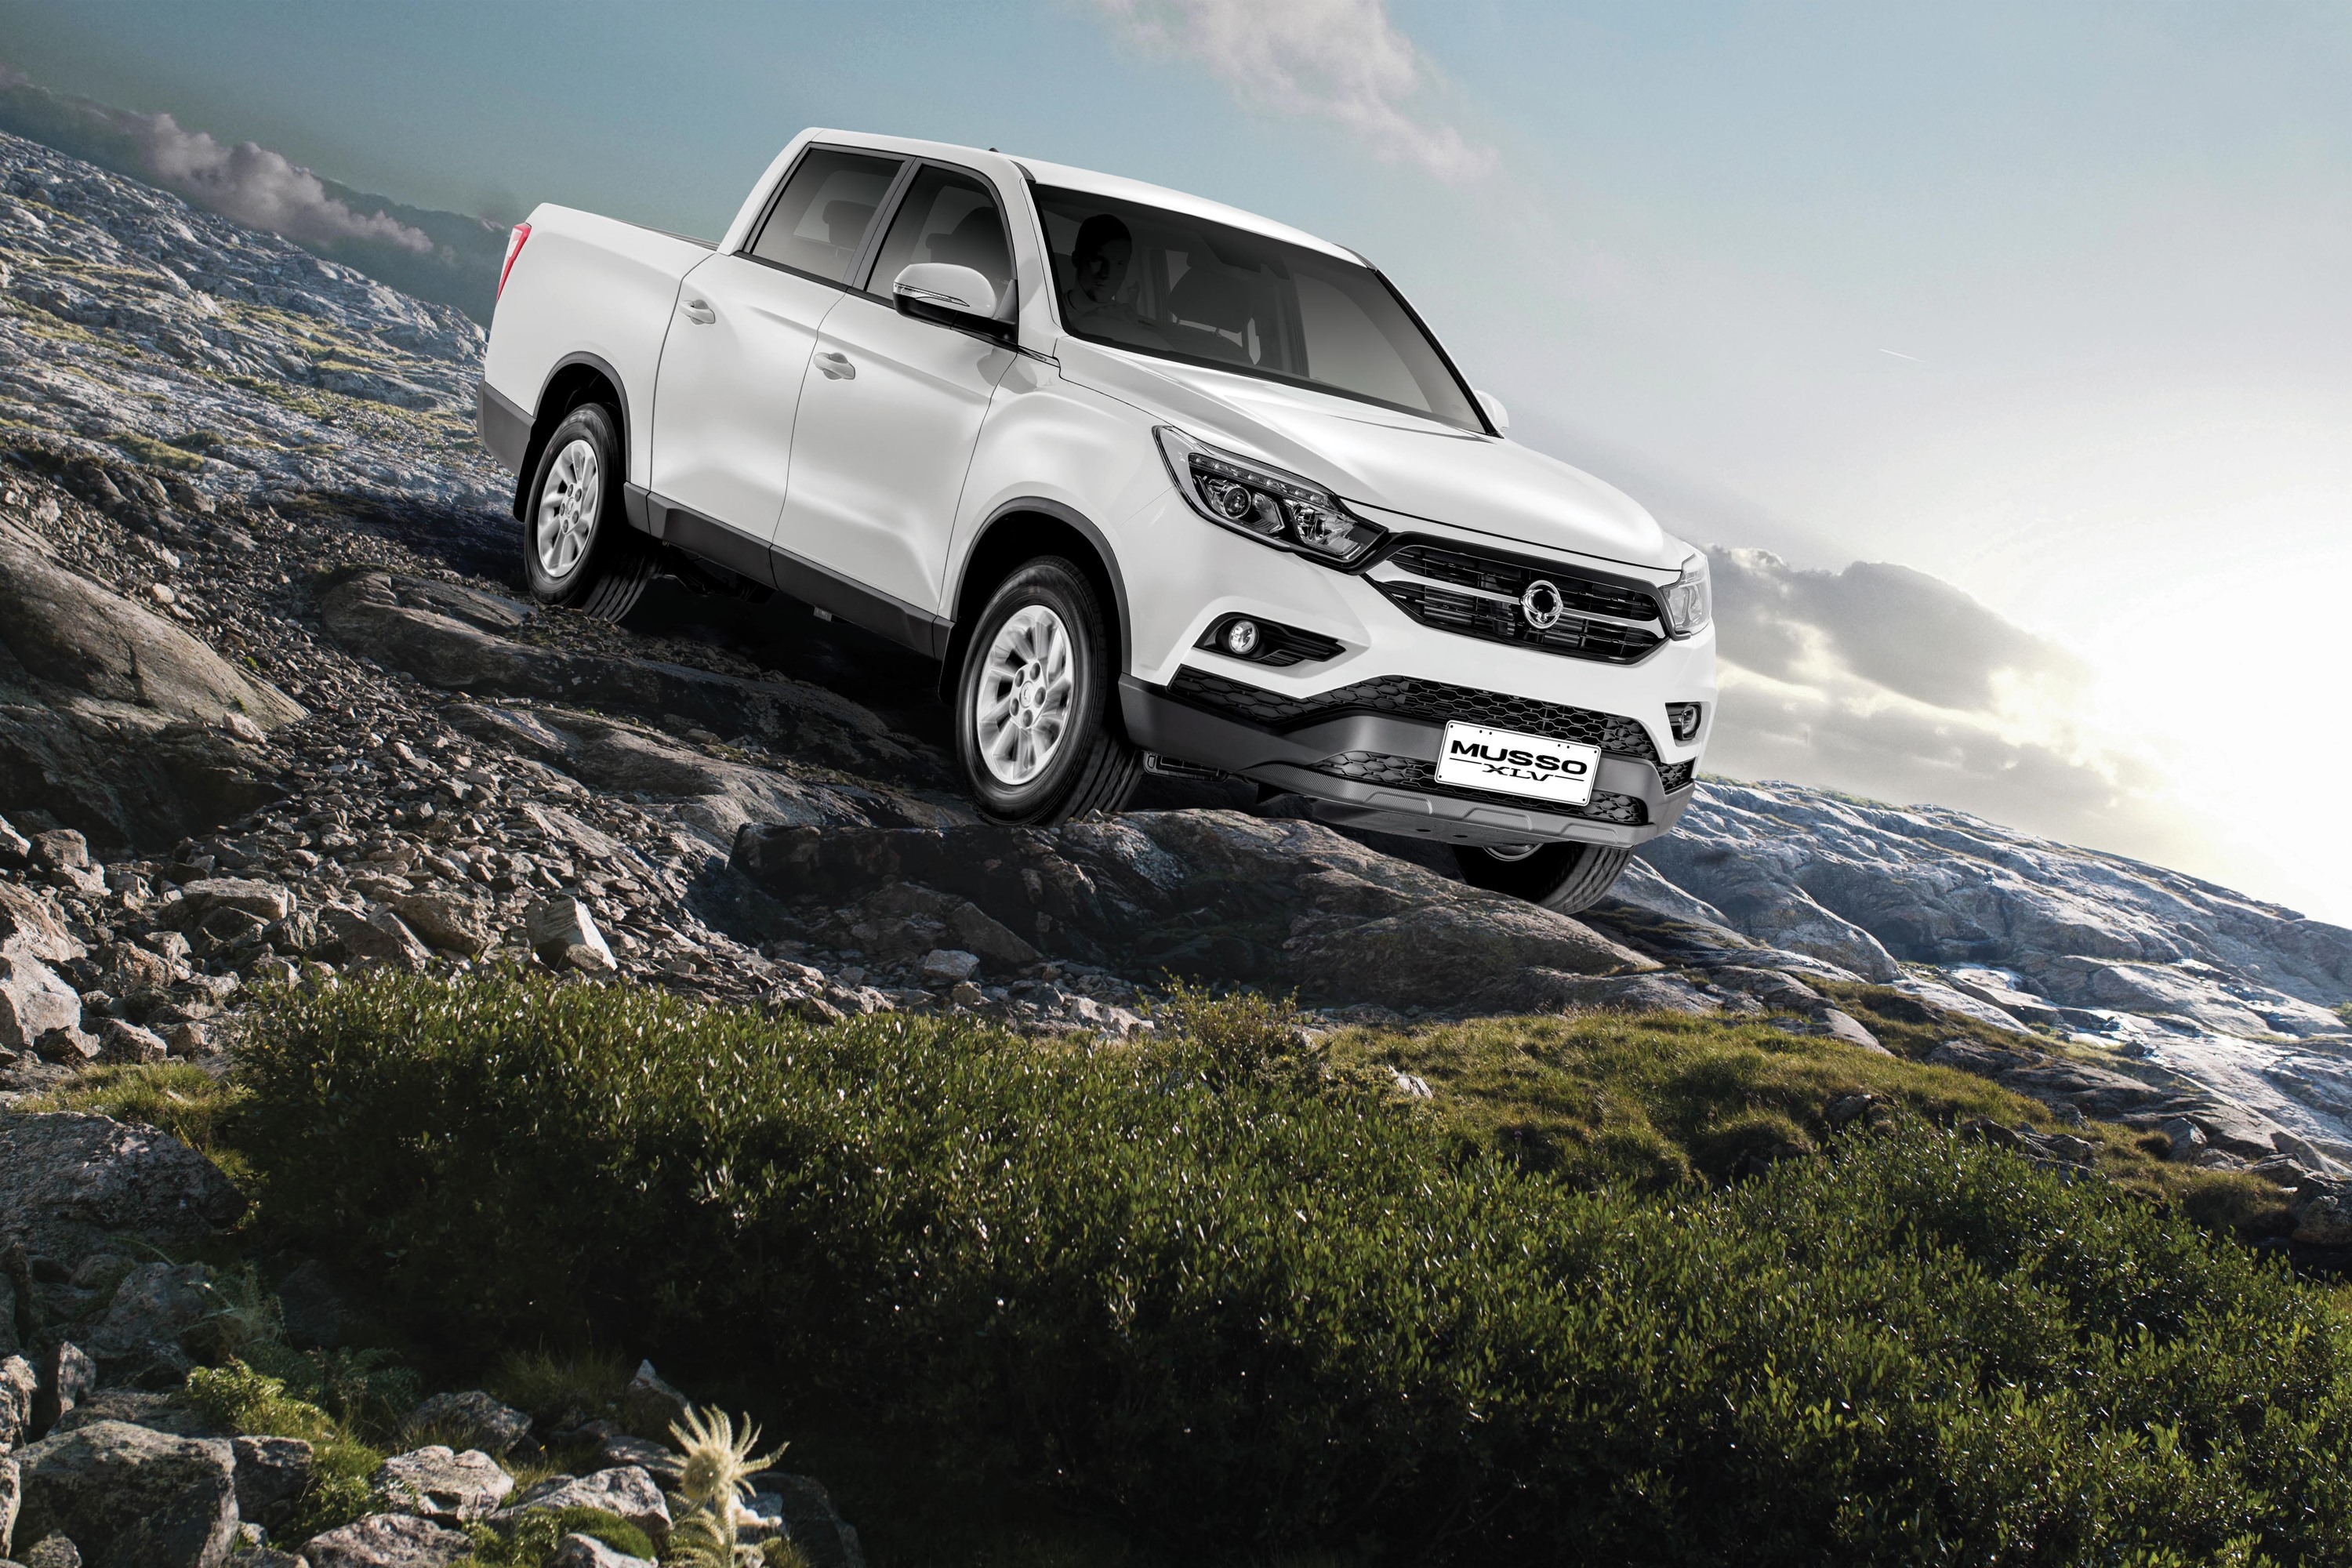 Саньенг 2024. SSANGYONG Musso 2022. Musso 2017. Санг енг Рекстон Муссо 2022. Mercedes Benz x class vs SSANGYONG Grand Musso.